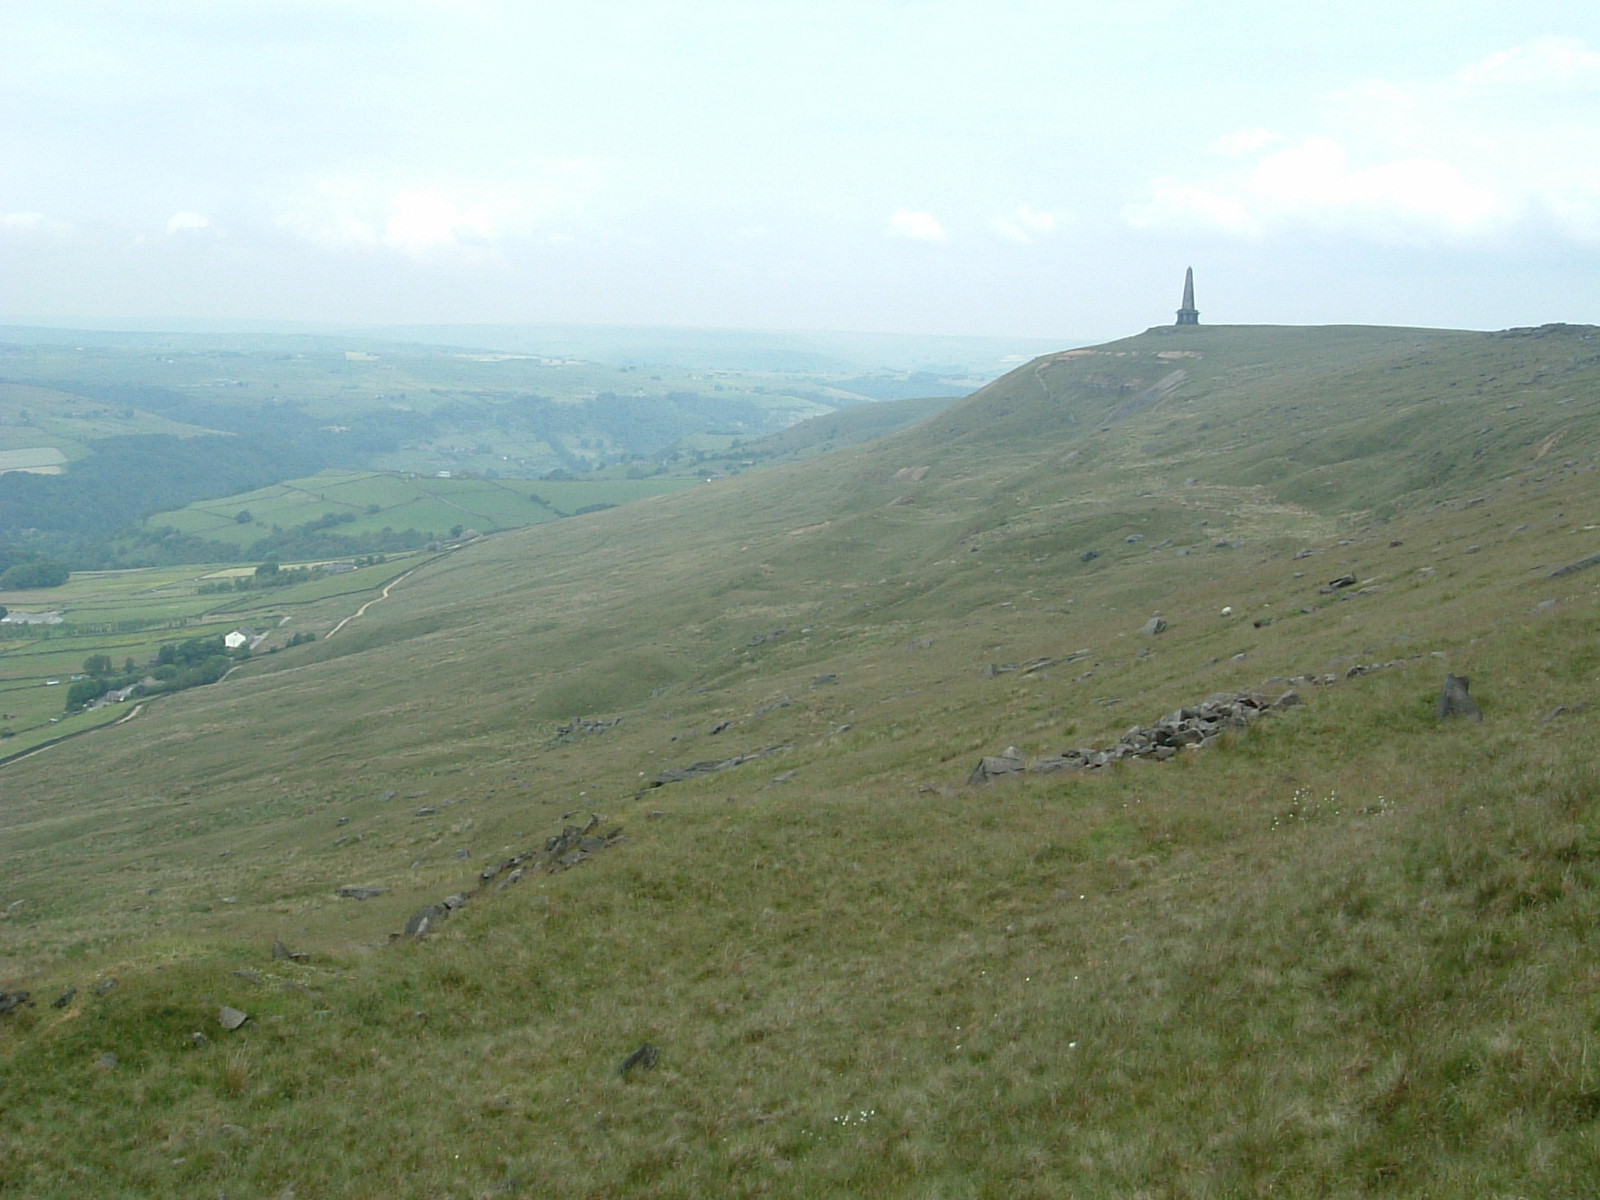 The Stoodley Pike monument